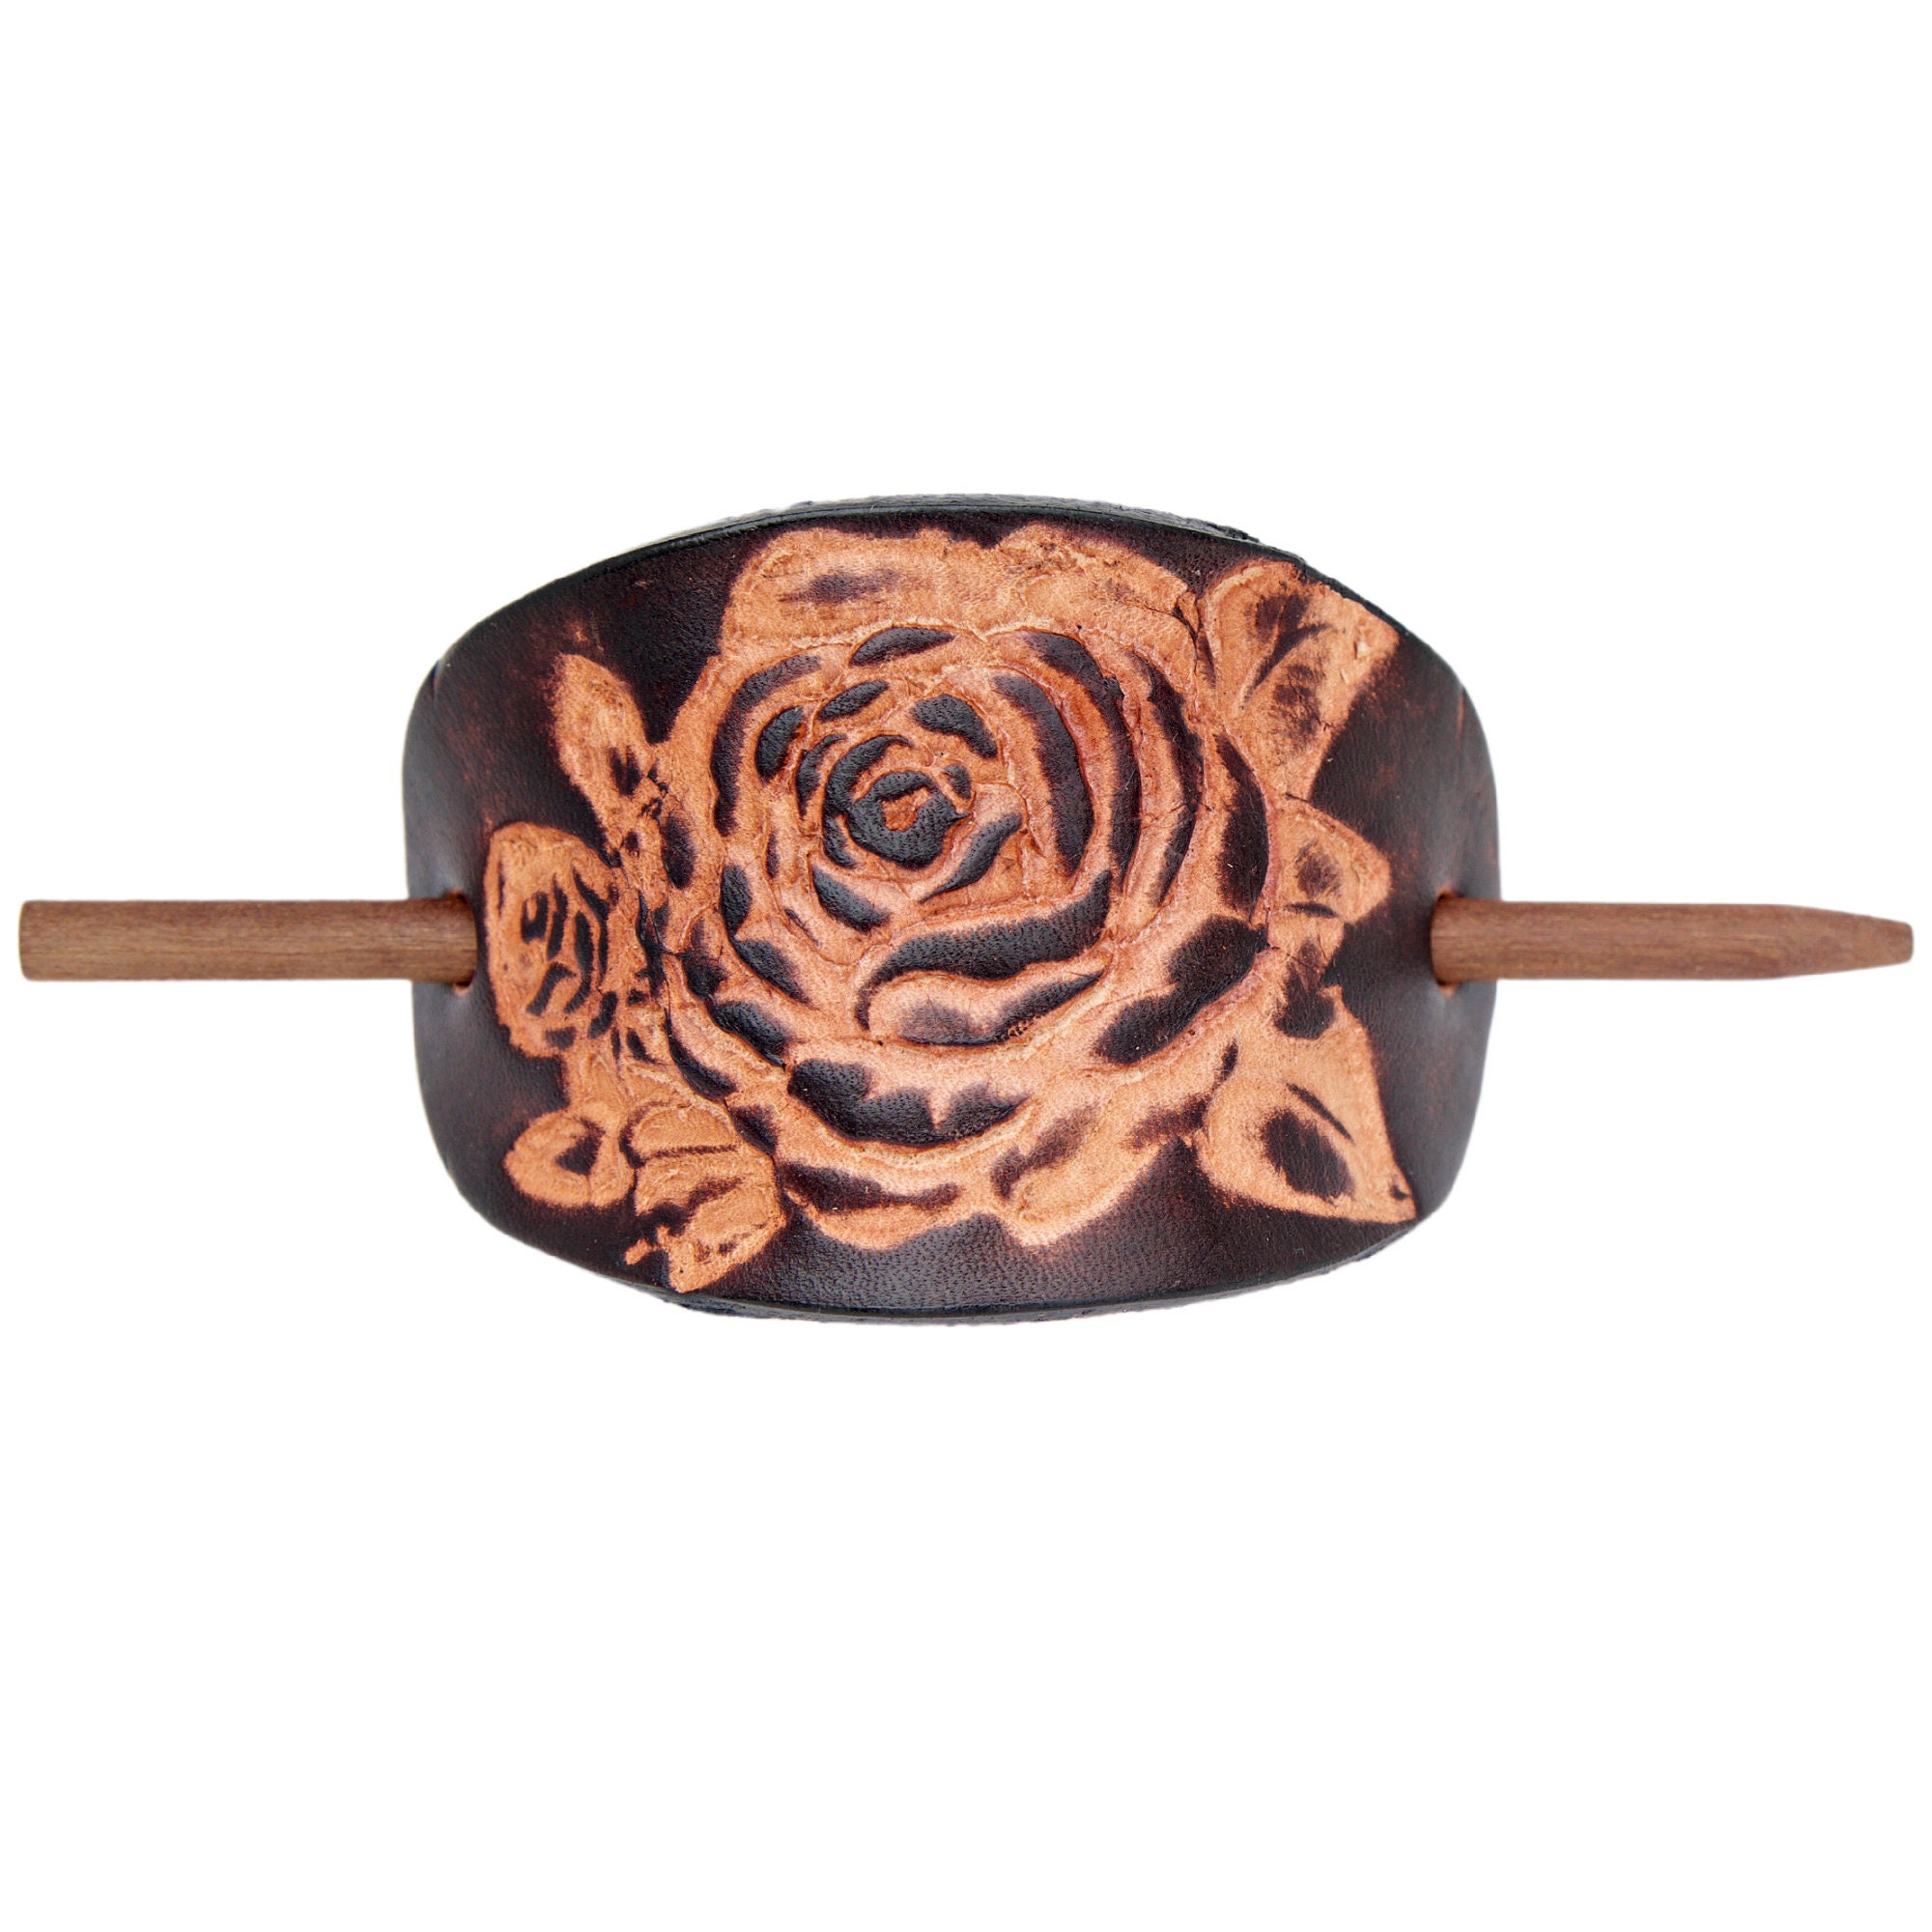 Brown Braided Leather Stick Barrette - Twisted Leather Hair Pin - Leather  Hair Slide - Hippie Hair Accessory - Plain Brown Leather Hair Pin